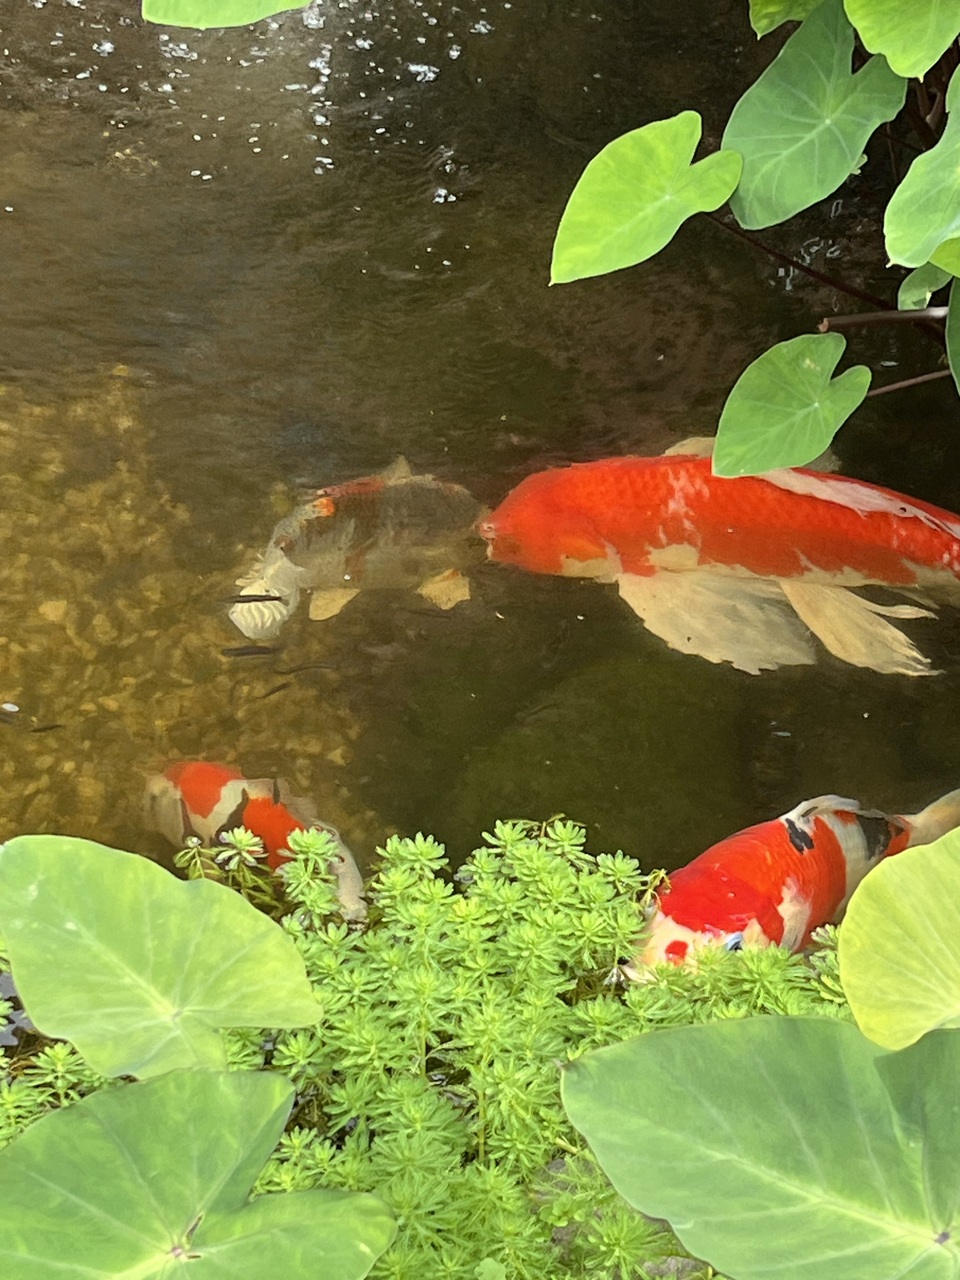 The koi are happy this morning!